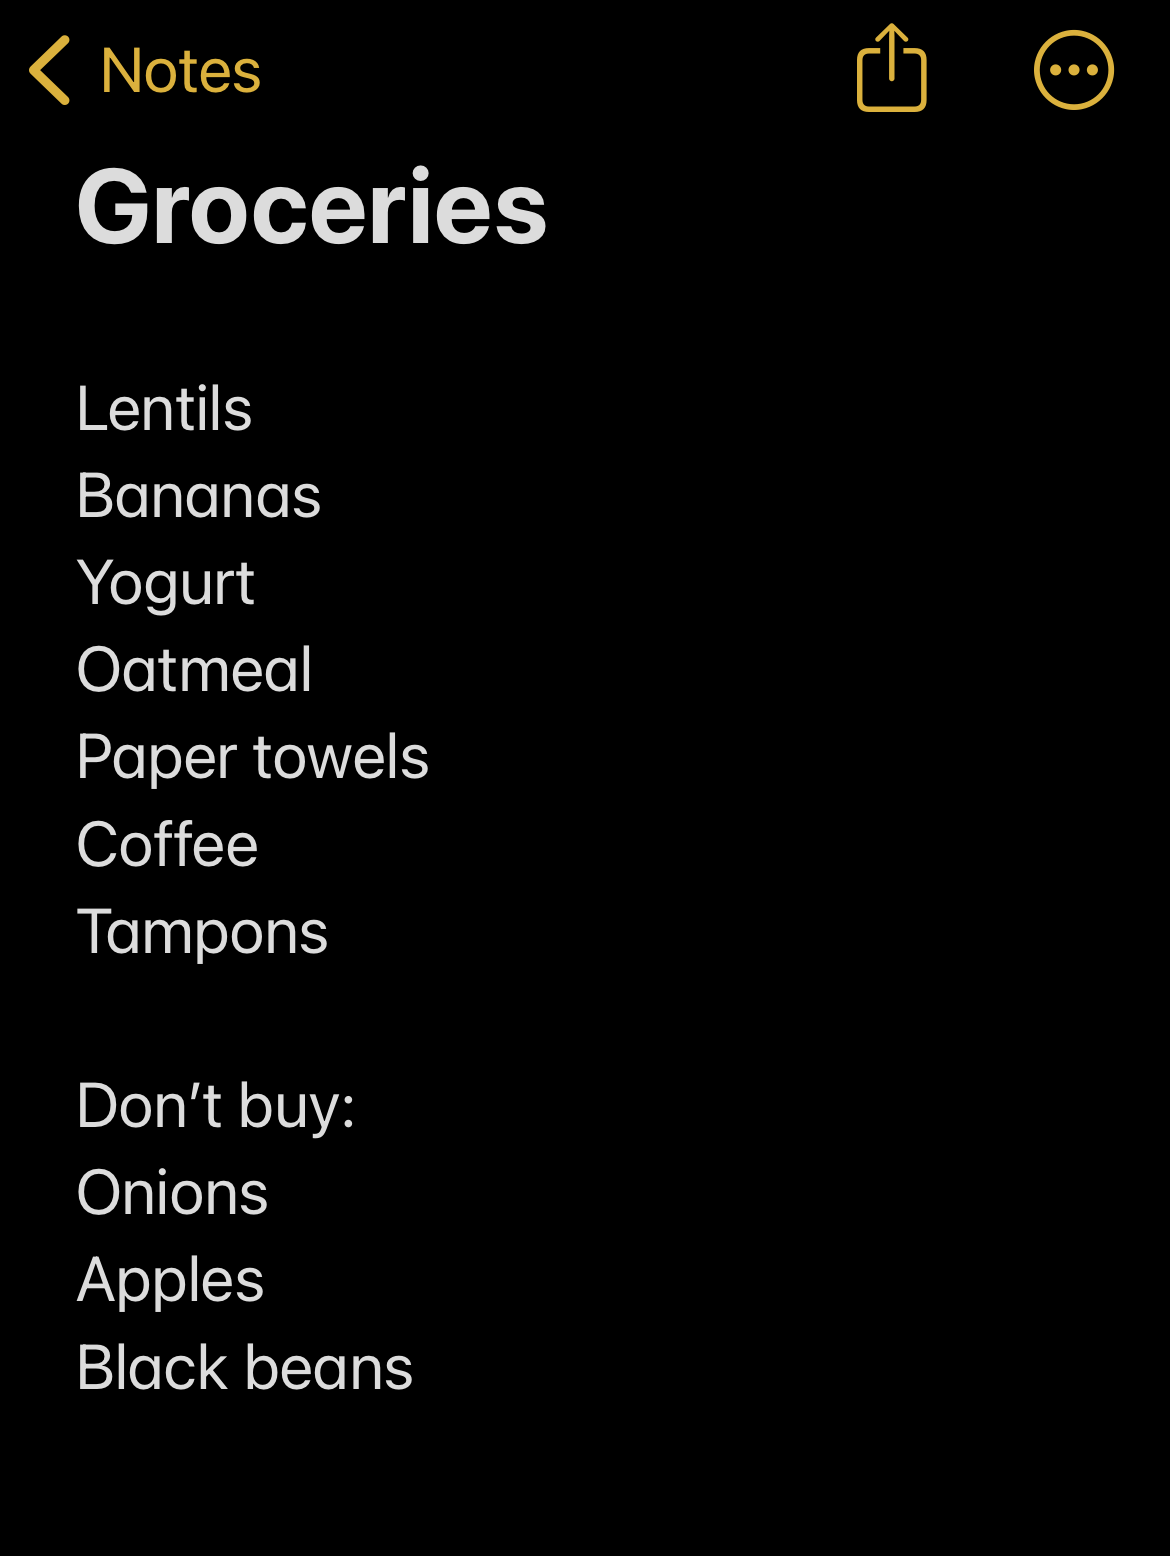 notes app grocery list with a don&#x27;t buy section